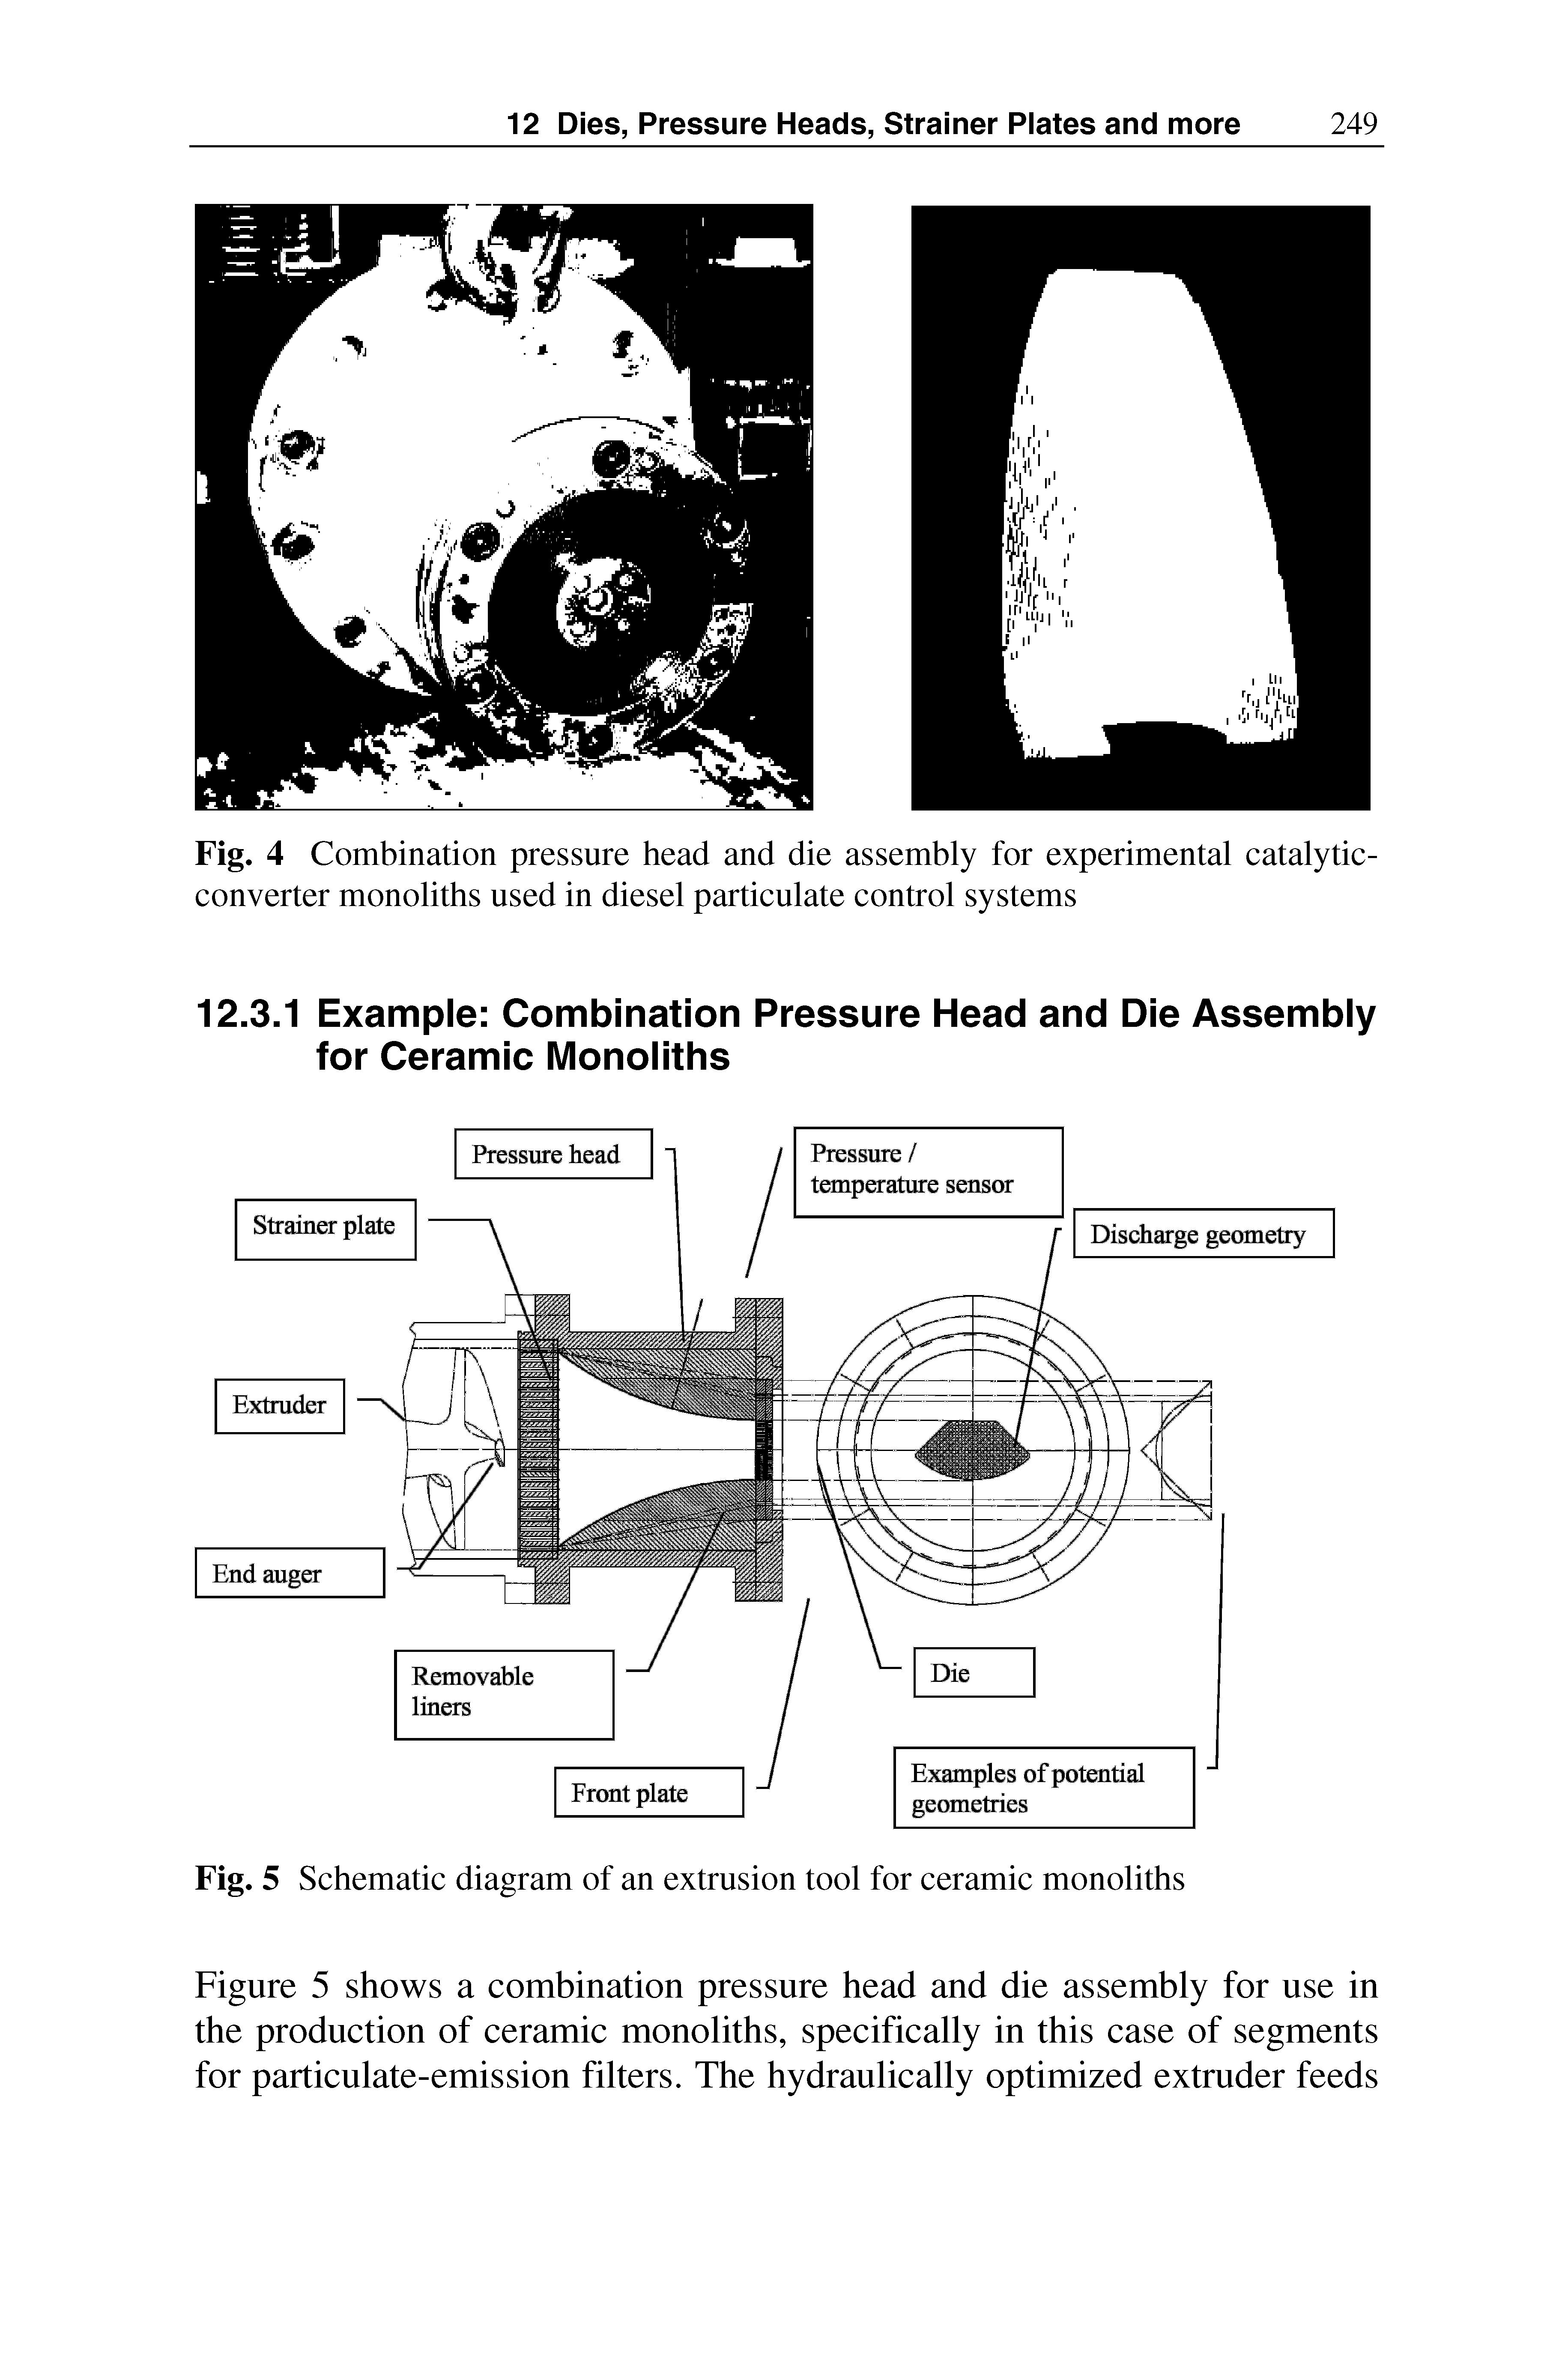 Fig. 4 Combination pressure head and die assembly for experimental catalytic-converter monoliths used in diesel particulate control systems...